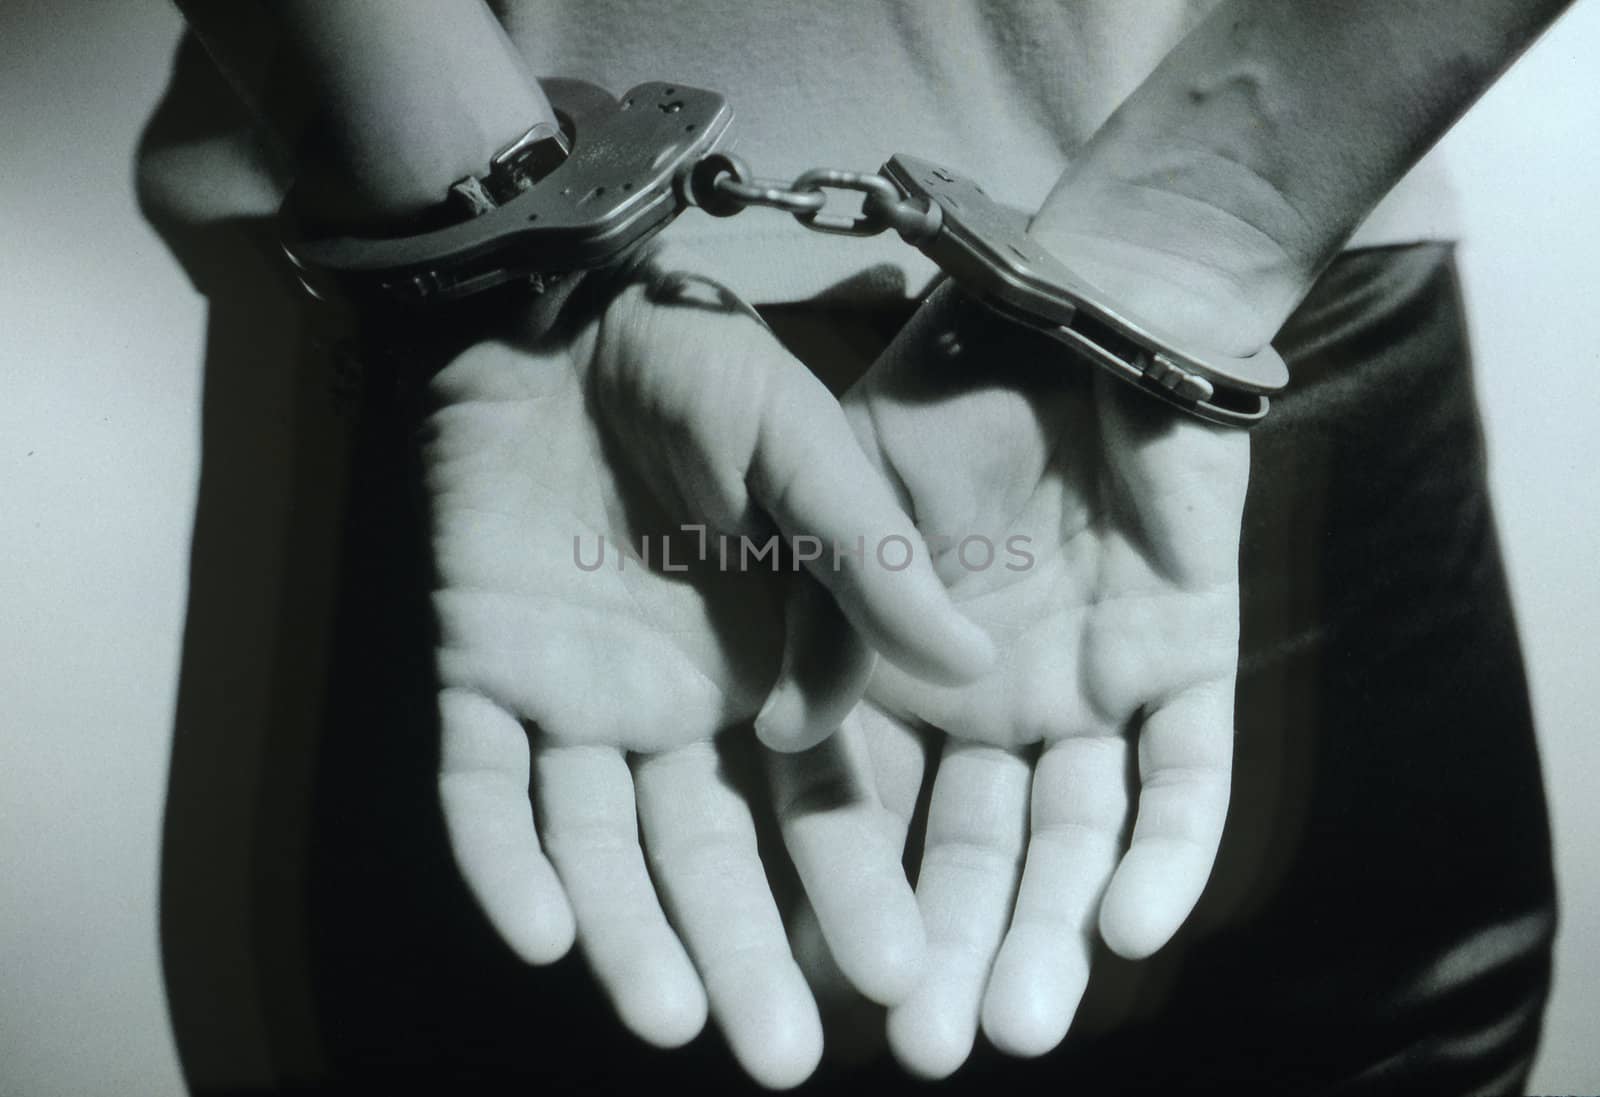 A black and white photo of woman's hands in cuffs behind her
